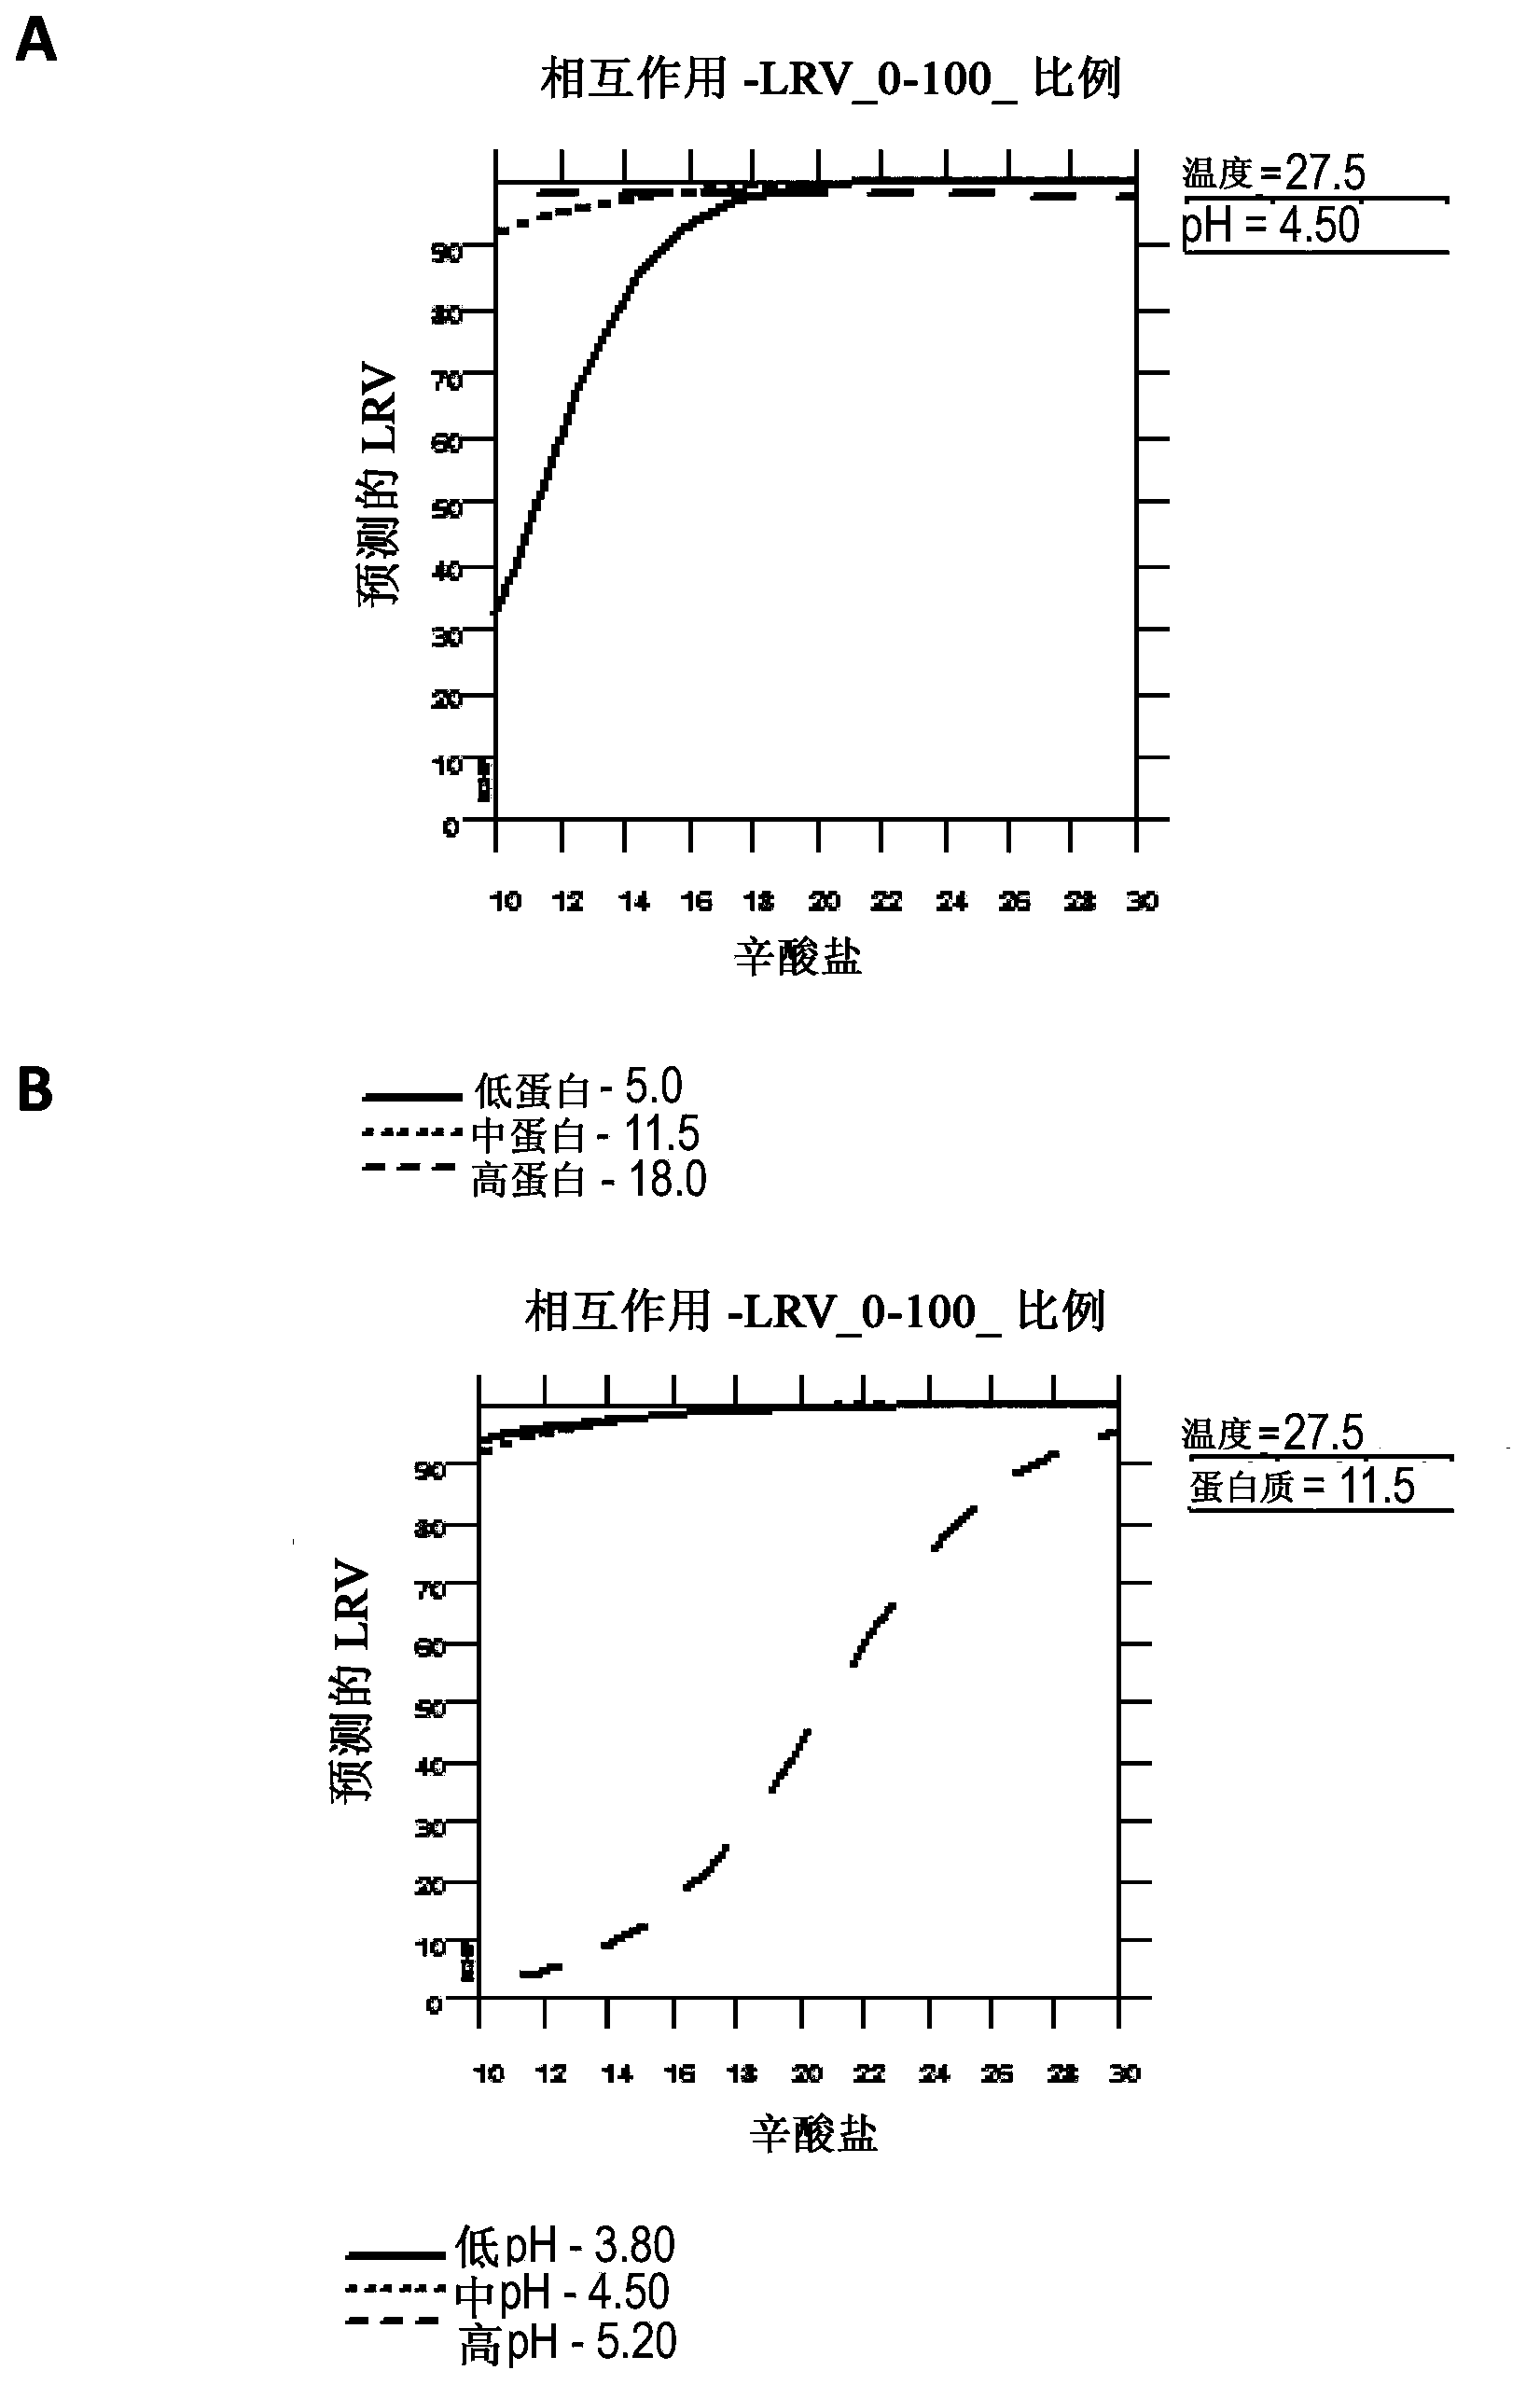 Method of preparing albumin from a solution comprising albumin and a method for inactivating viruses using caprylate in solutions containing albumin